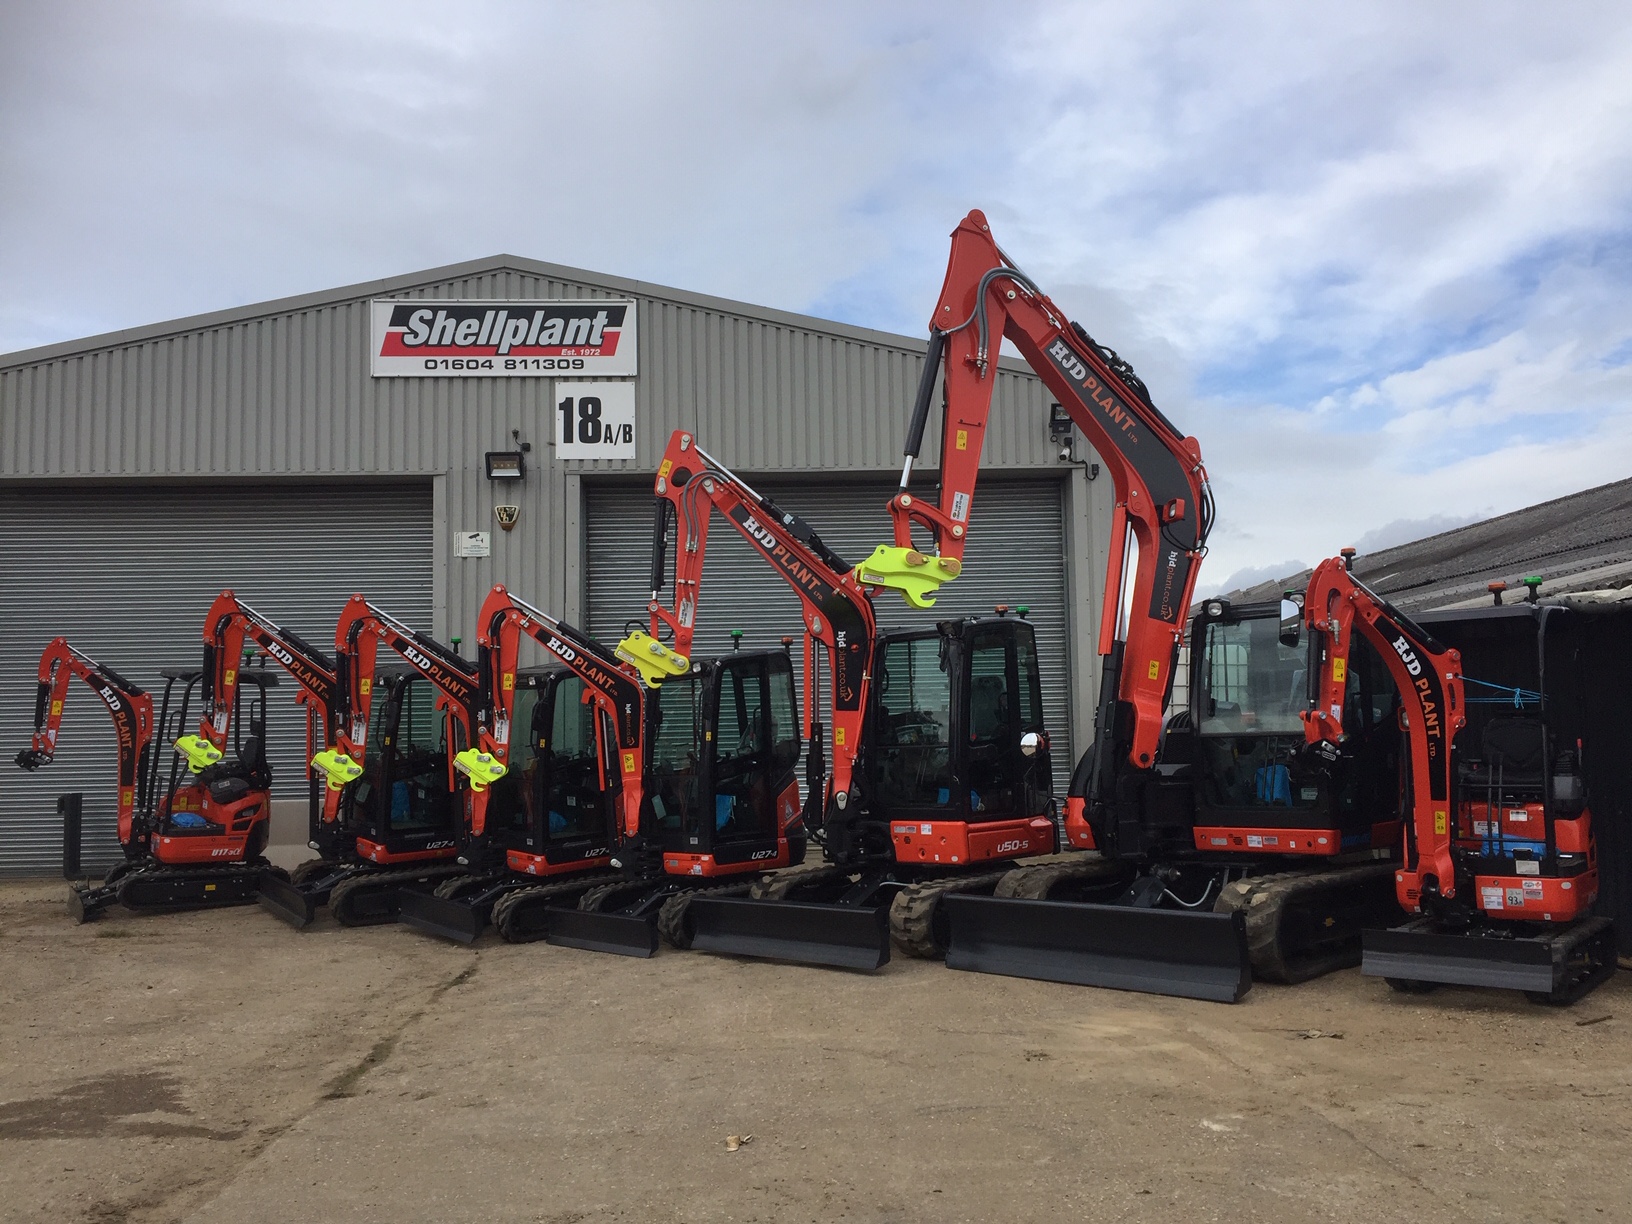 Kubota helps launch new plant solutions company